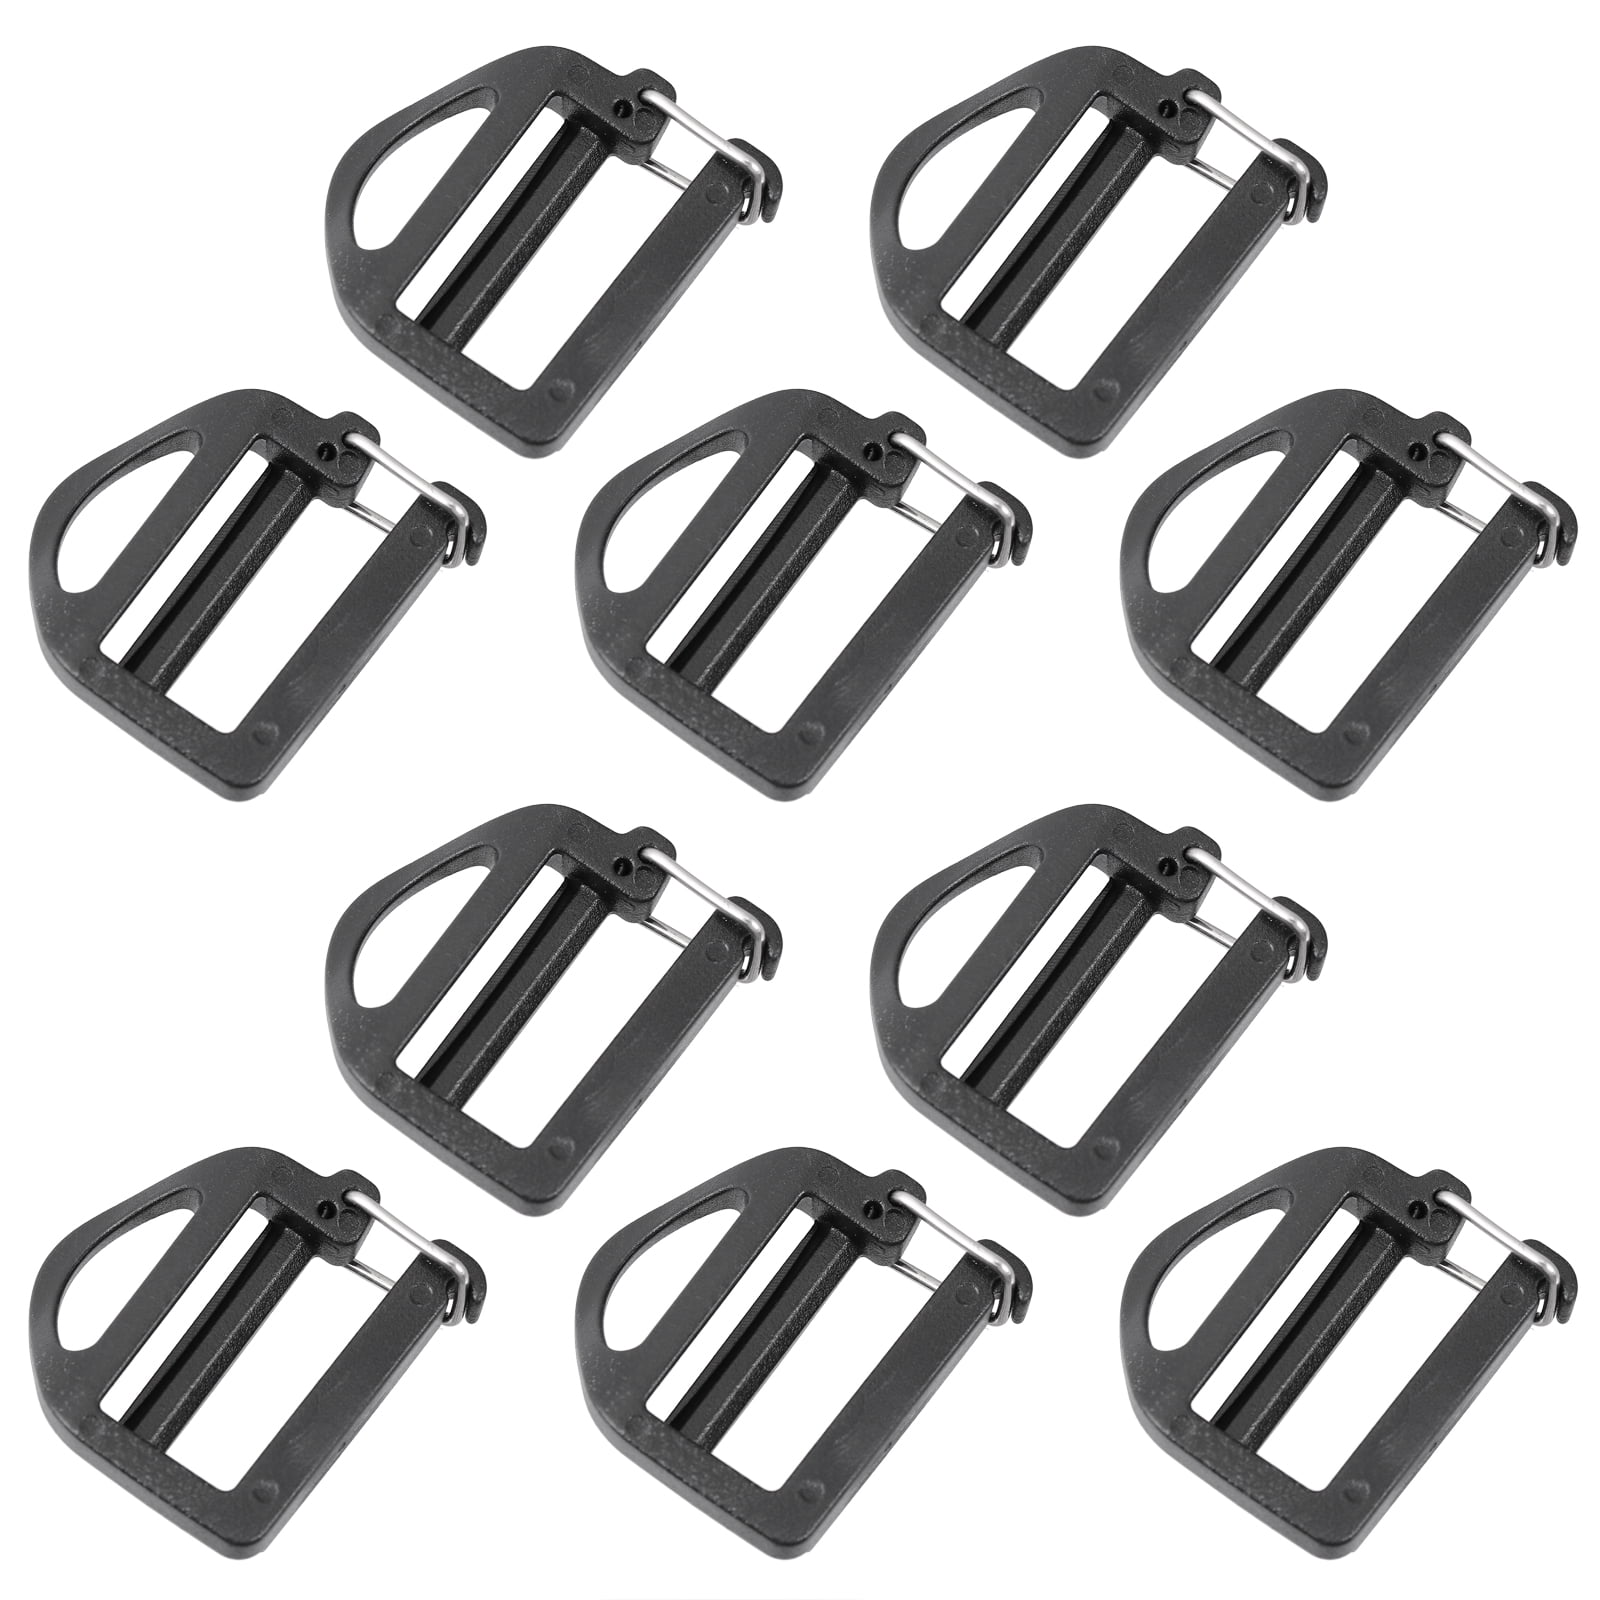 Uxcell Backpack Plastic Anti-slip Replacement Shoulder Bag Strap Pads Black  5 Pack